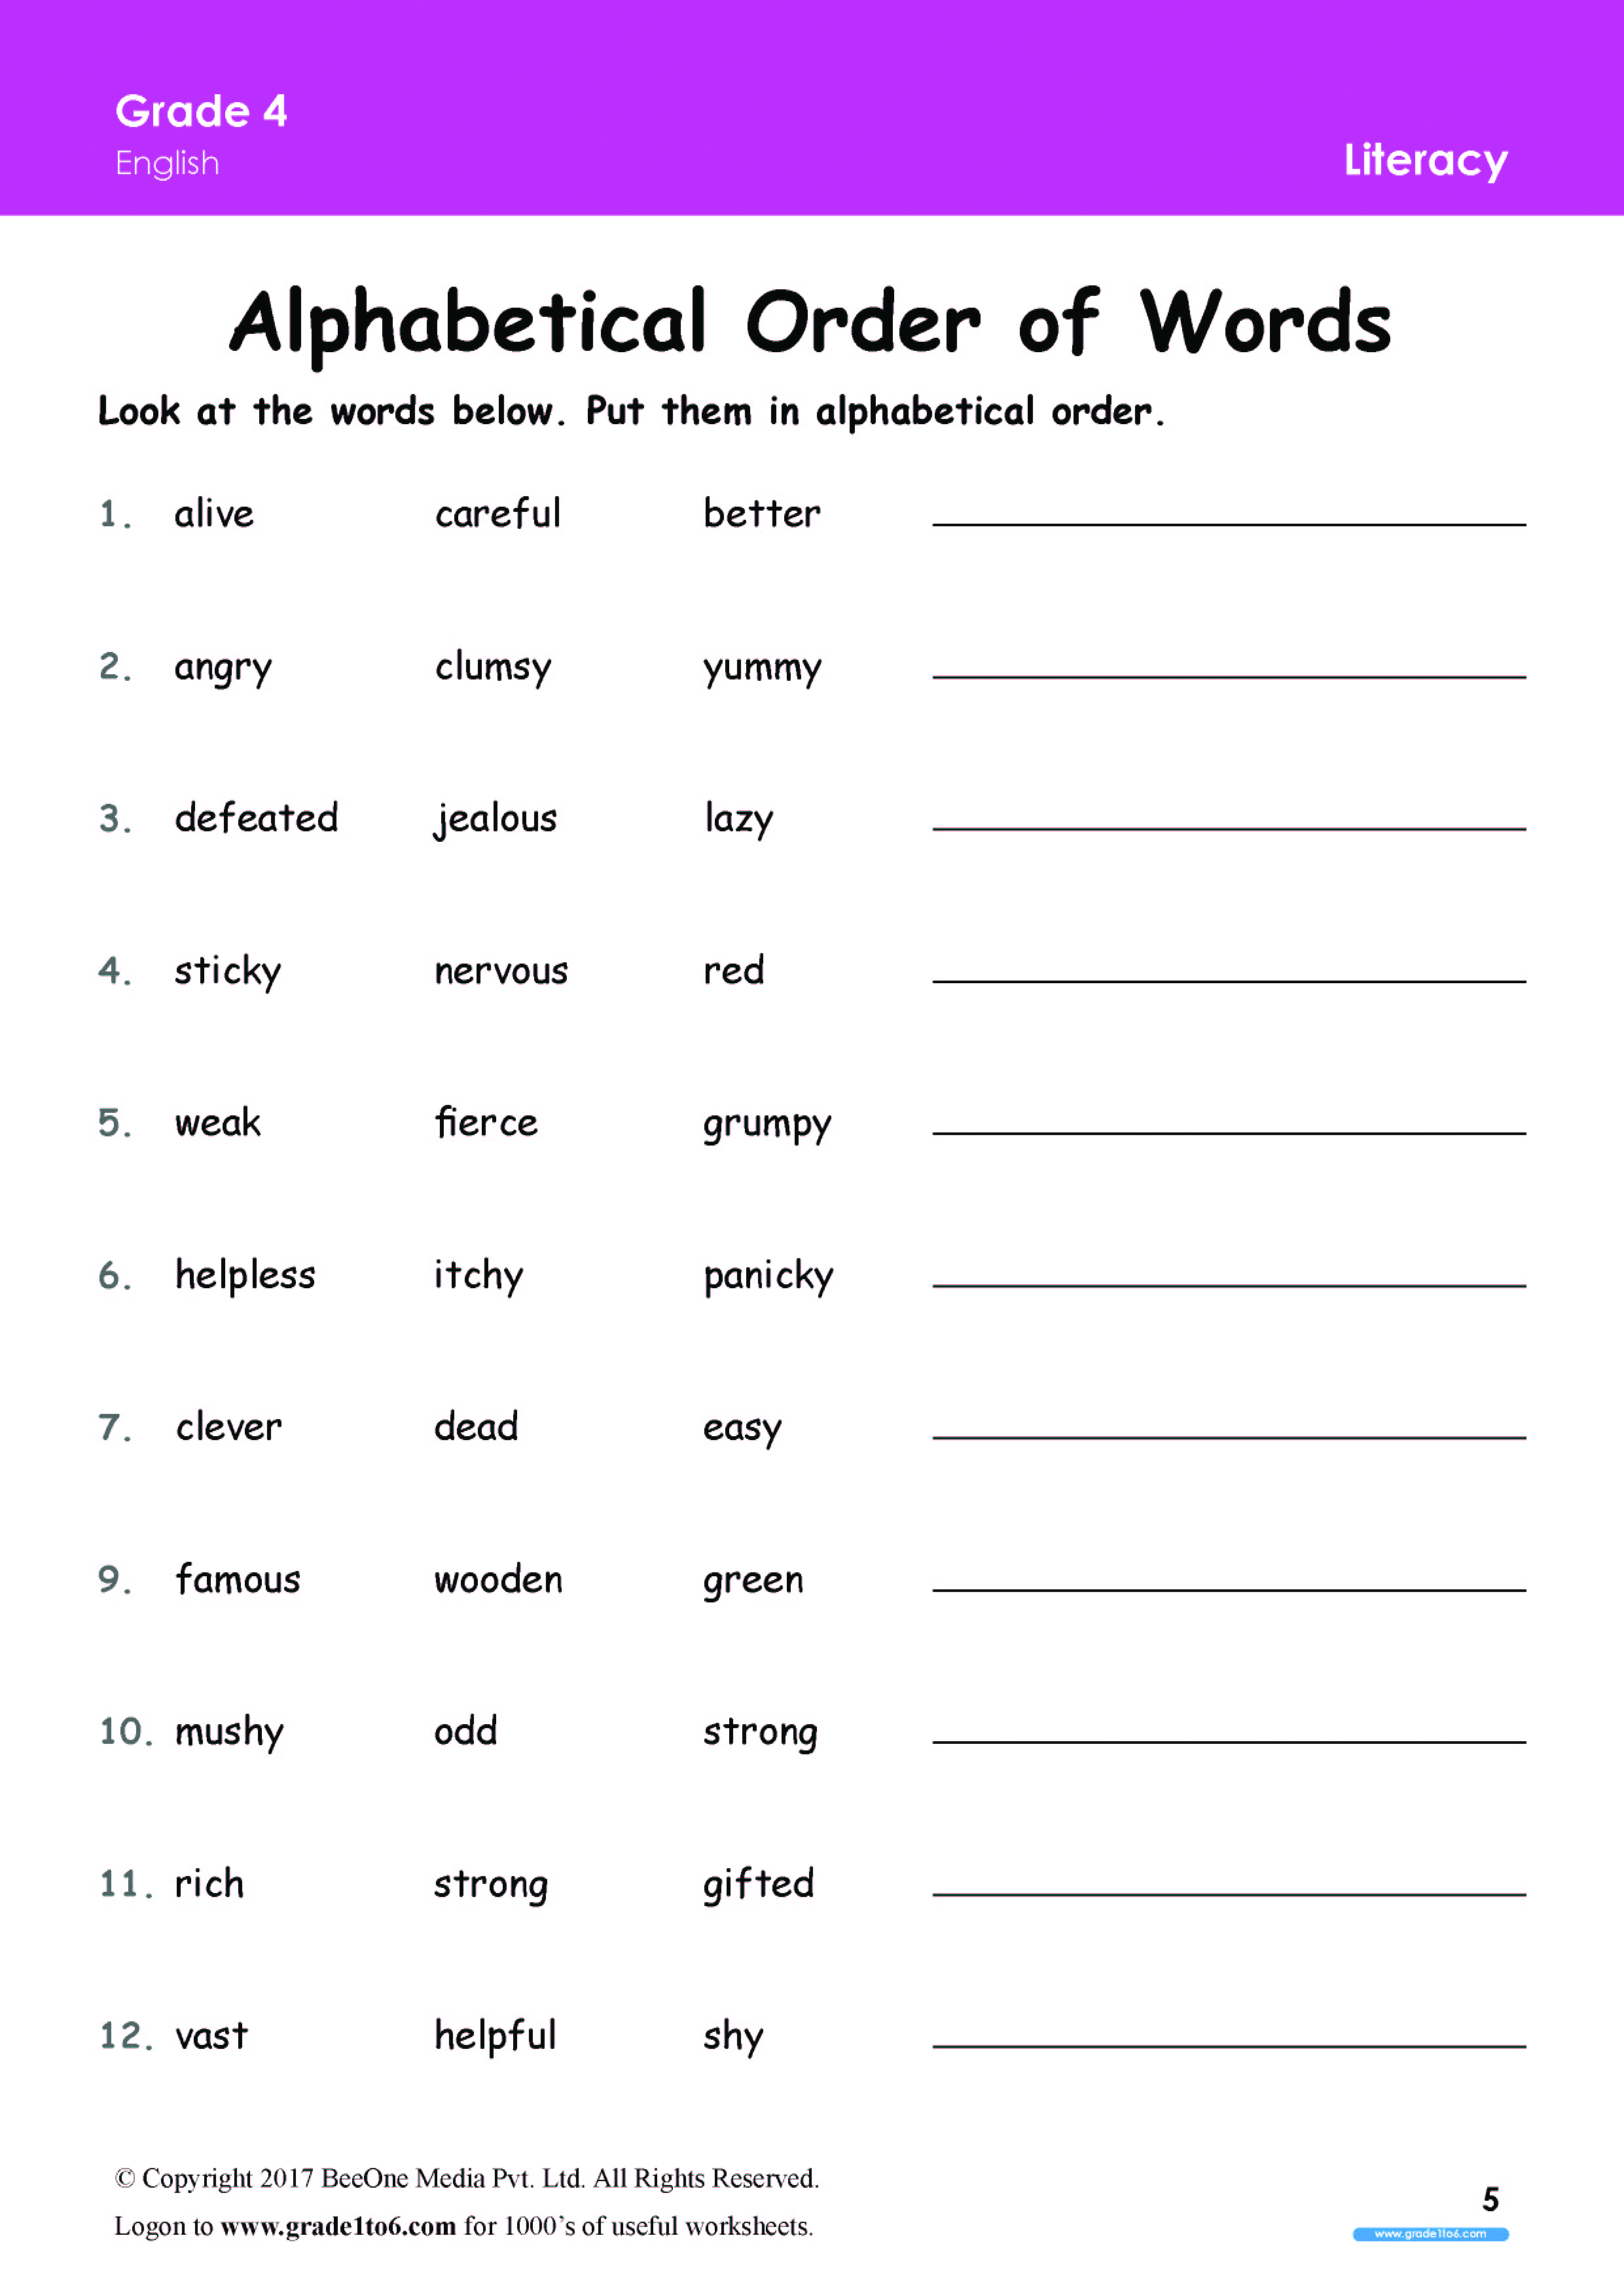 alphabetical-order-worksheets-grade-4wwwgrade1to6com-alphabetical-order-to-the-first-second